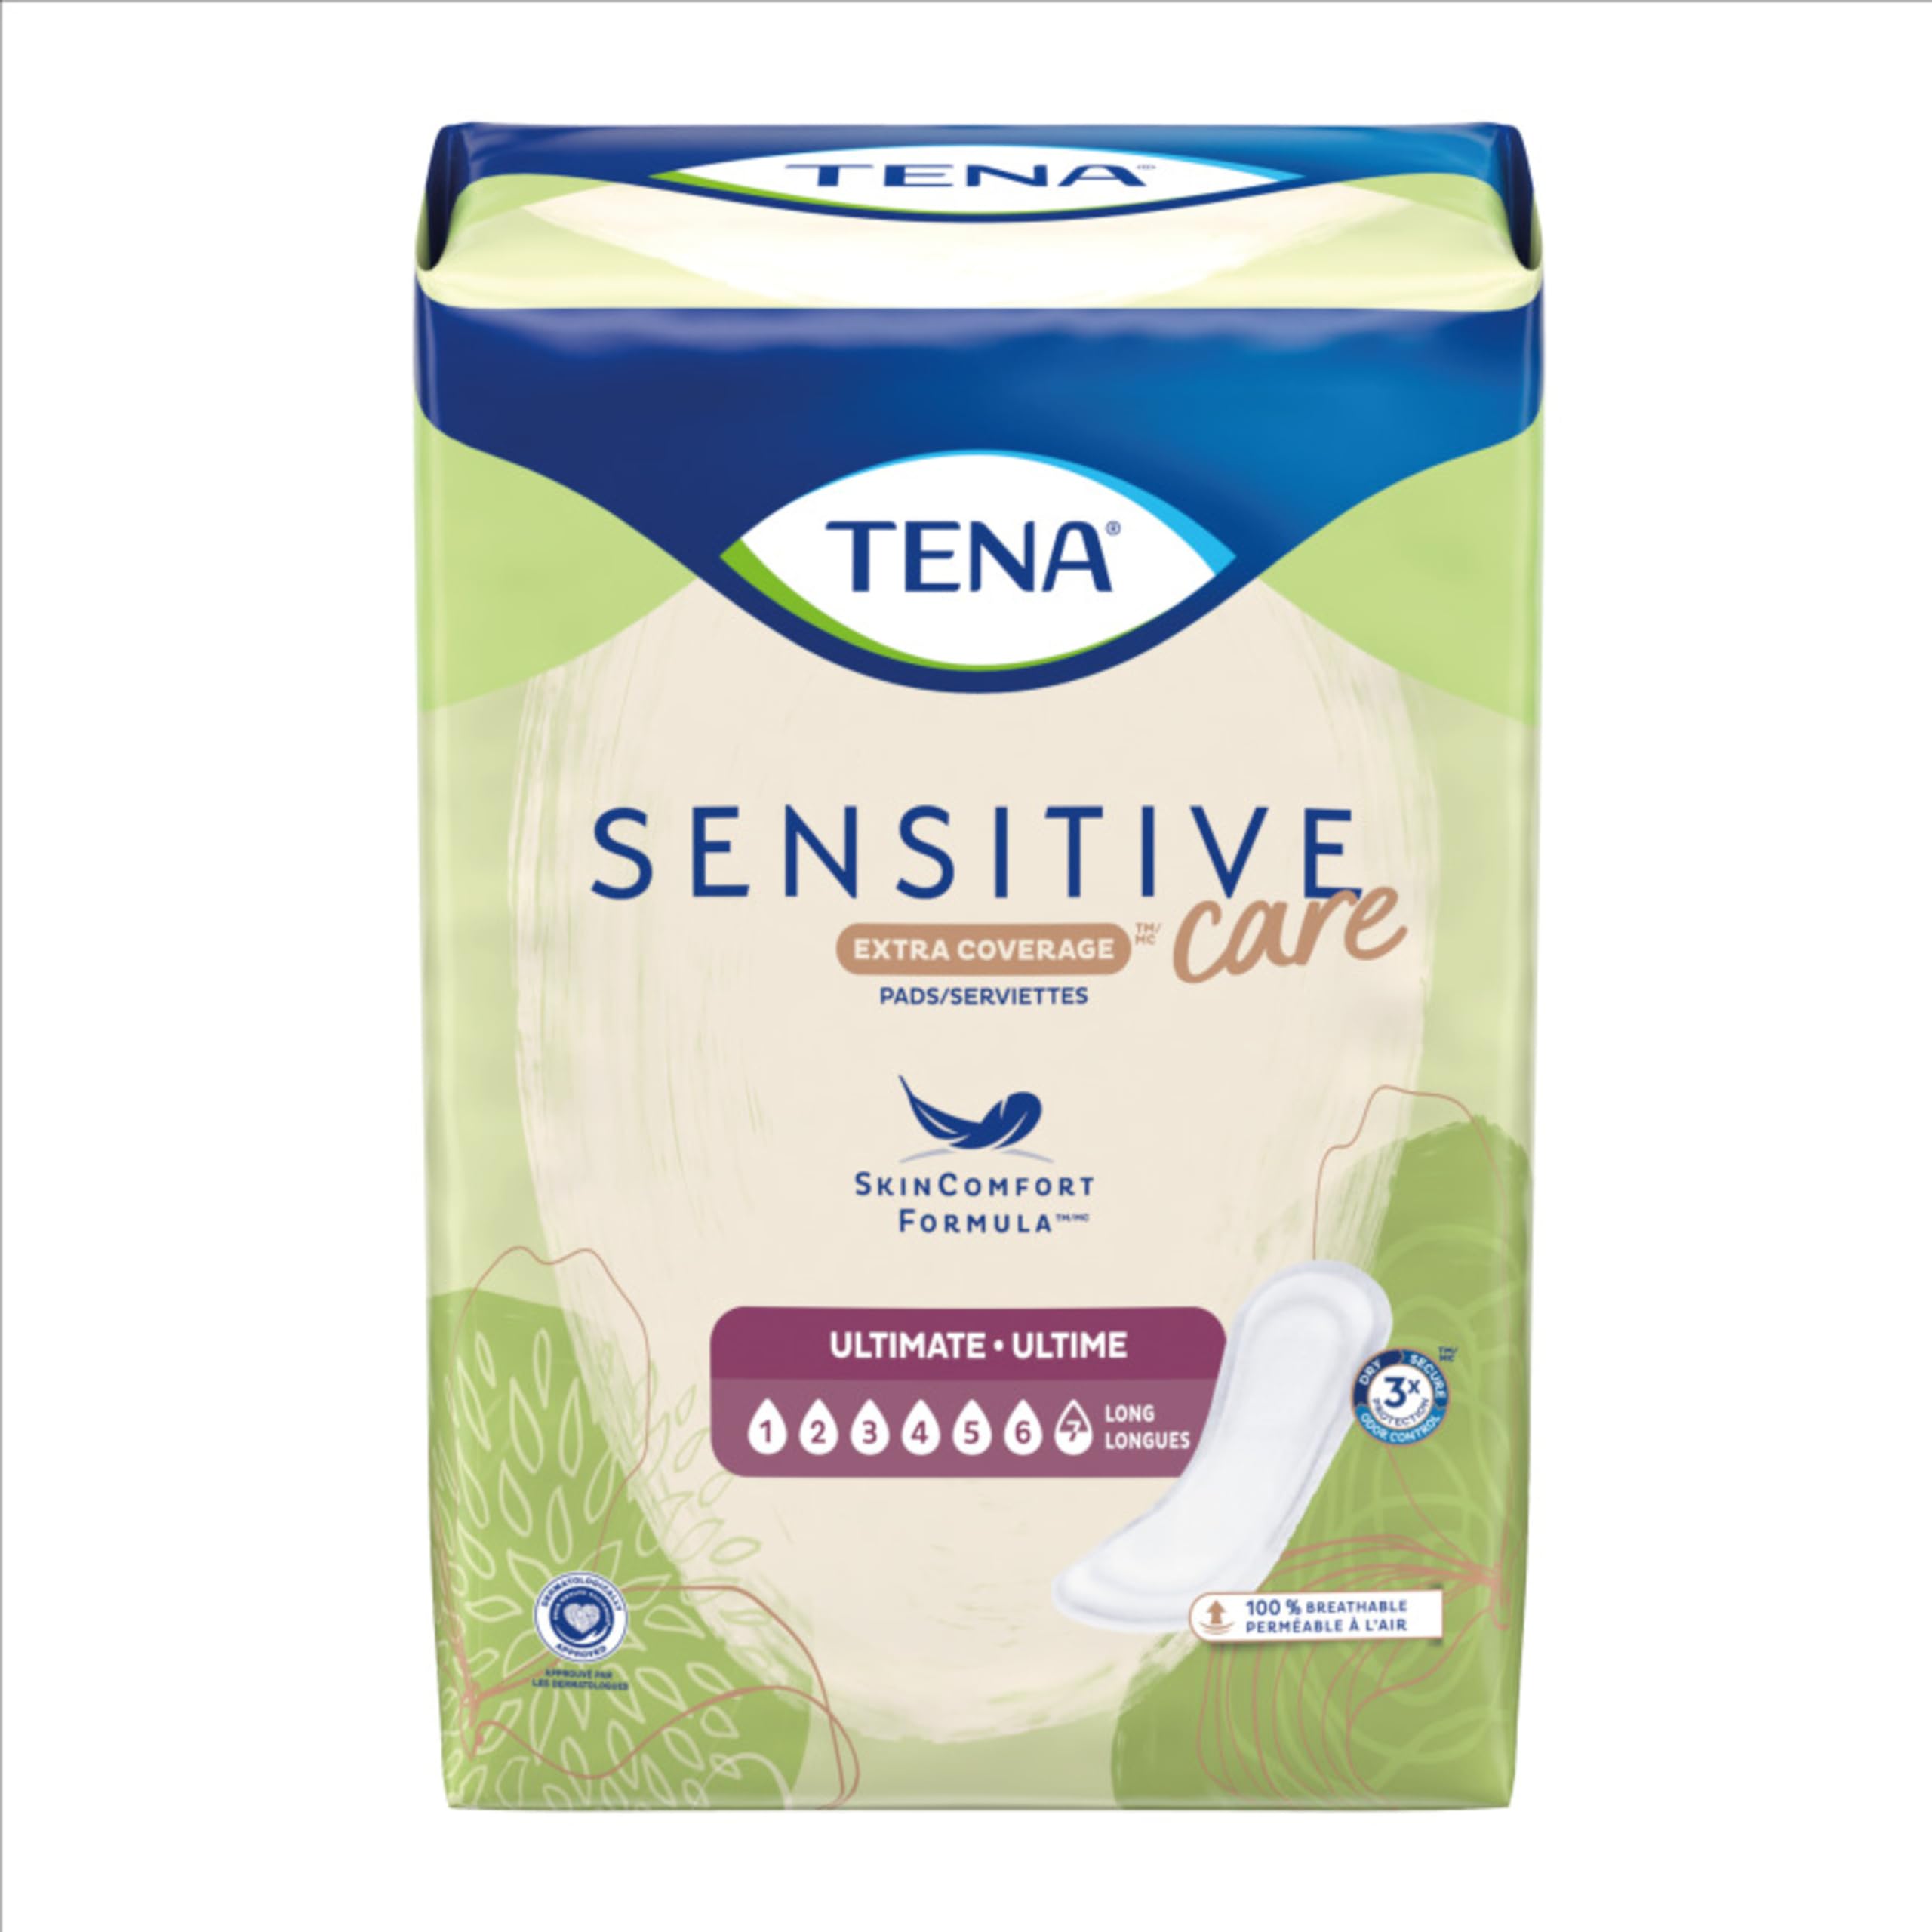 TENA Incontinence Pads, Bladder Control & Postpartum for Women, Ultimate Absorbency, Long Length, Sensitive Care - 52 Count